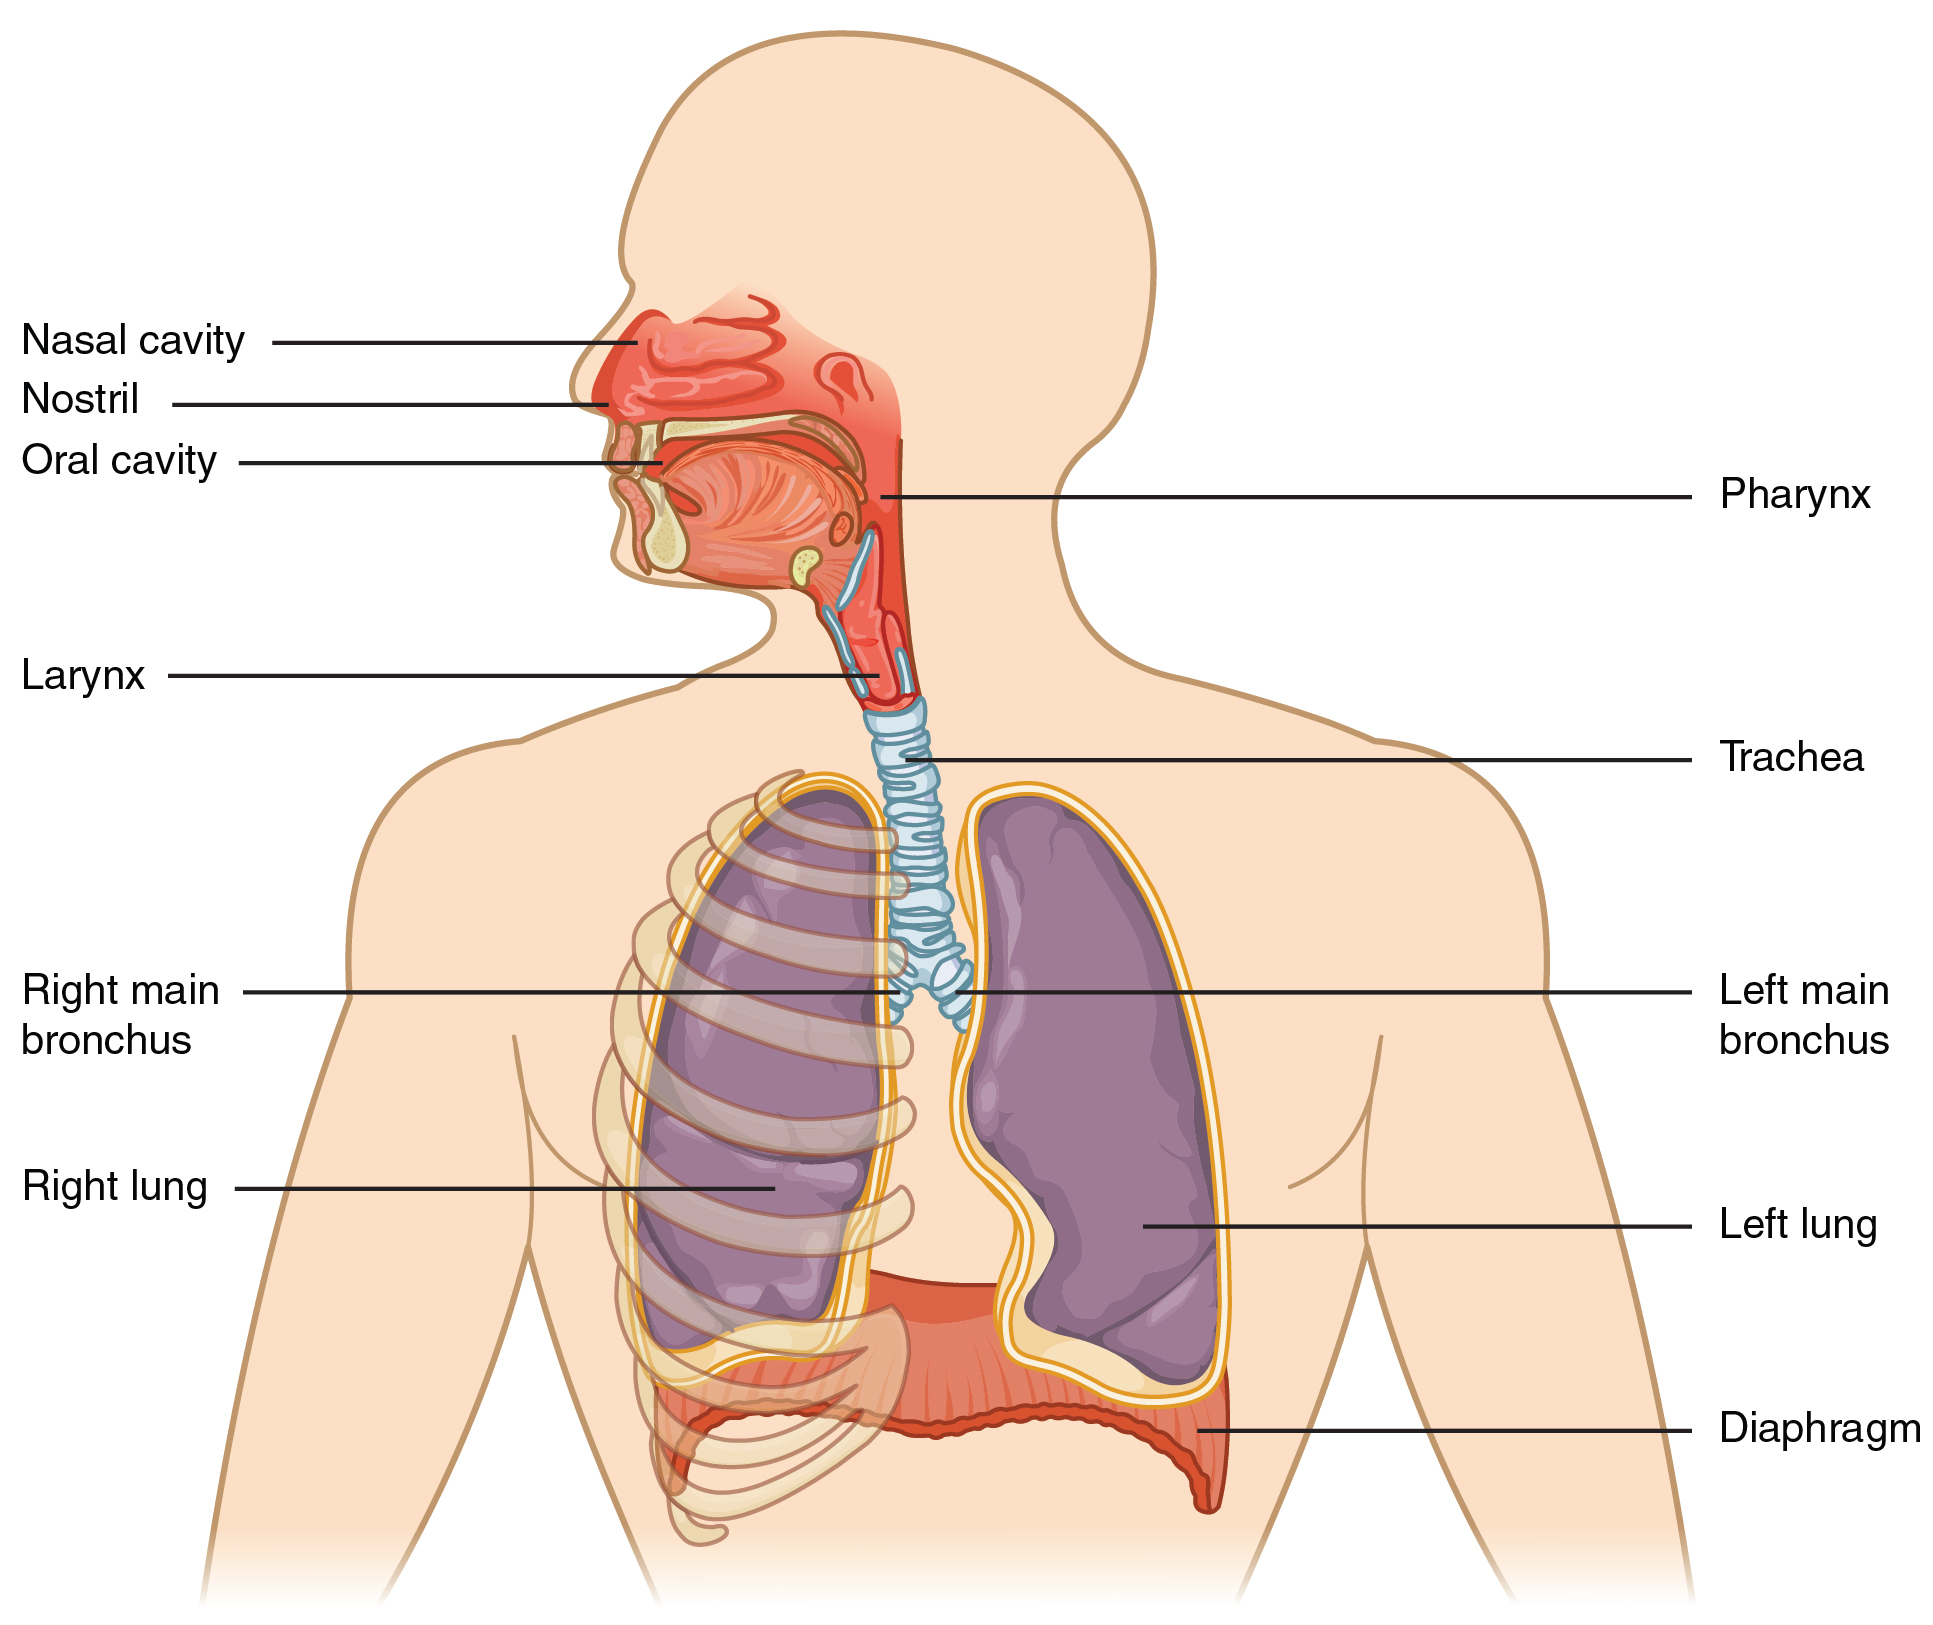 Human respiratory and phonatory system. Figure from the OpenStax \textit{Anatomy and Physiology} Textbook. Download for free at \url{https://cnx.org/contents/14fb4ad7-39a1-4eee-ab6e-3ef2482e3e22@15.1}.